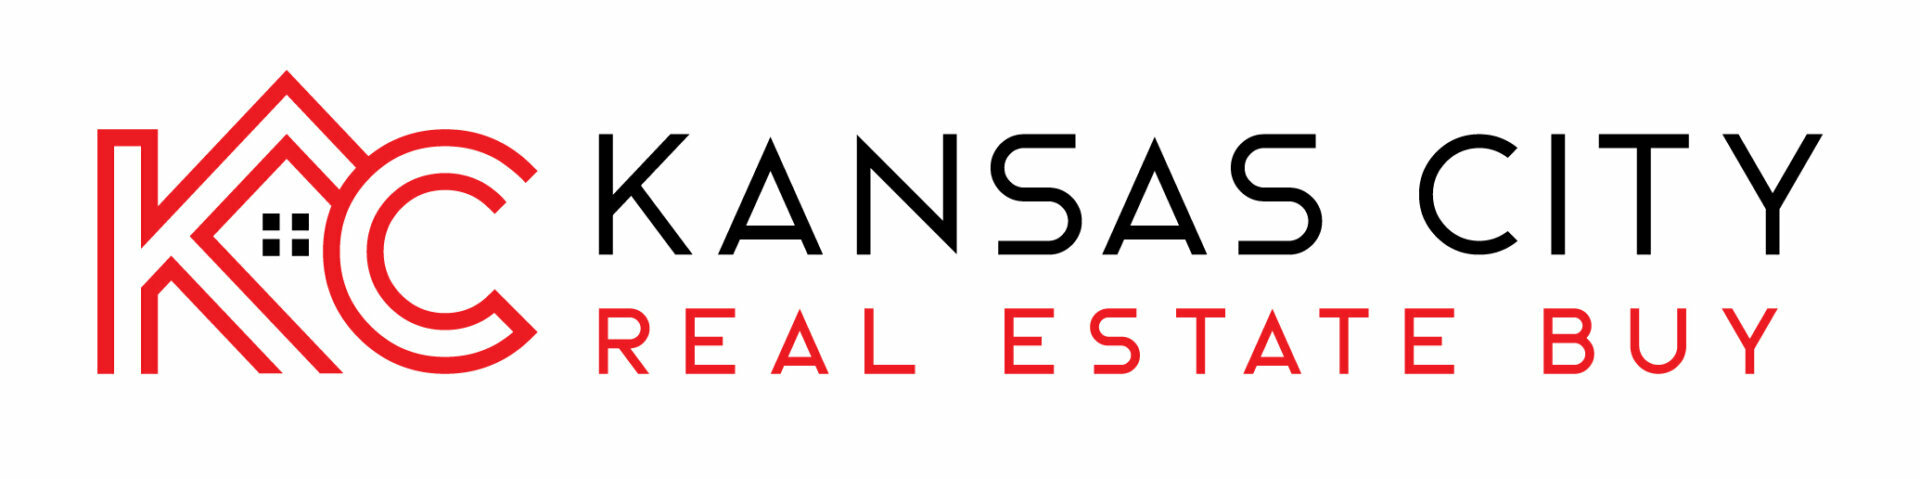 Kansas City Real Estate Buy LLC Expands Into All Kansas/Missouri Markets Enabling Homeowners To Sell Their Homes Fast and Efficiently